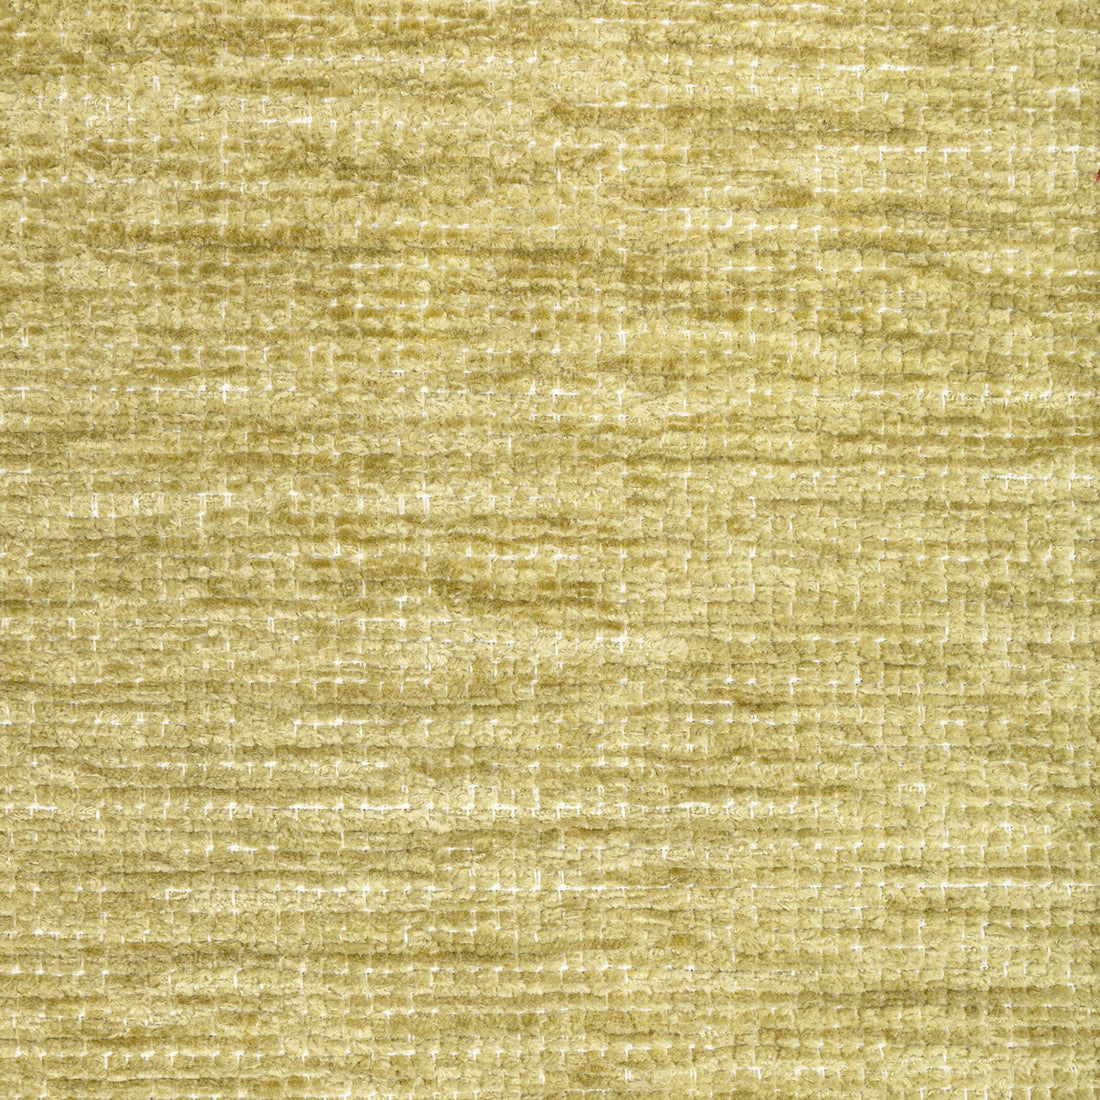 Lemenc Texture fabric in leaf color - pattern 8022124.23.0 - by Brunschwig &amp; Fils in the Chambery Textures III collection